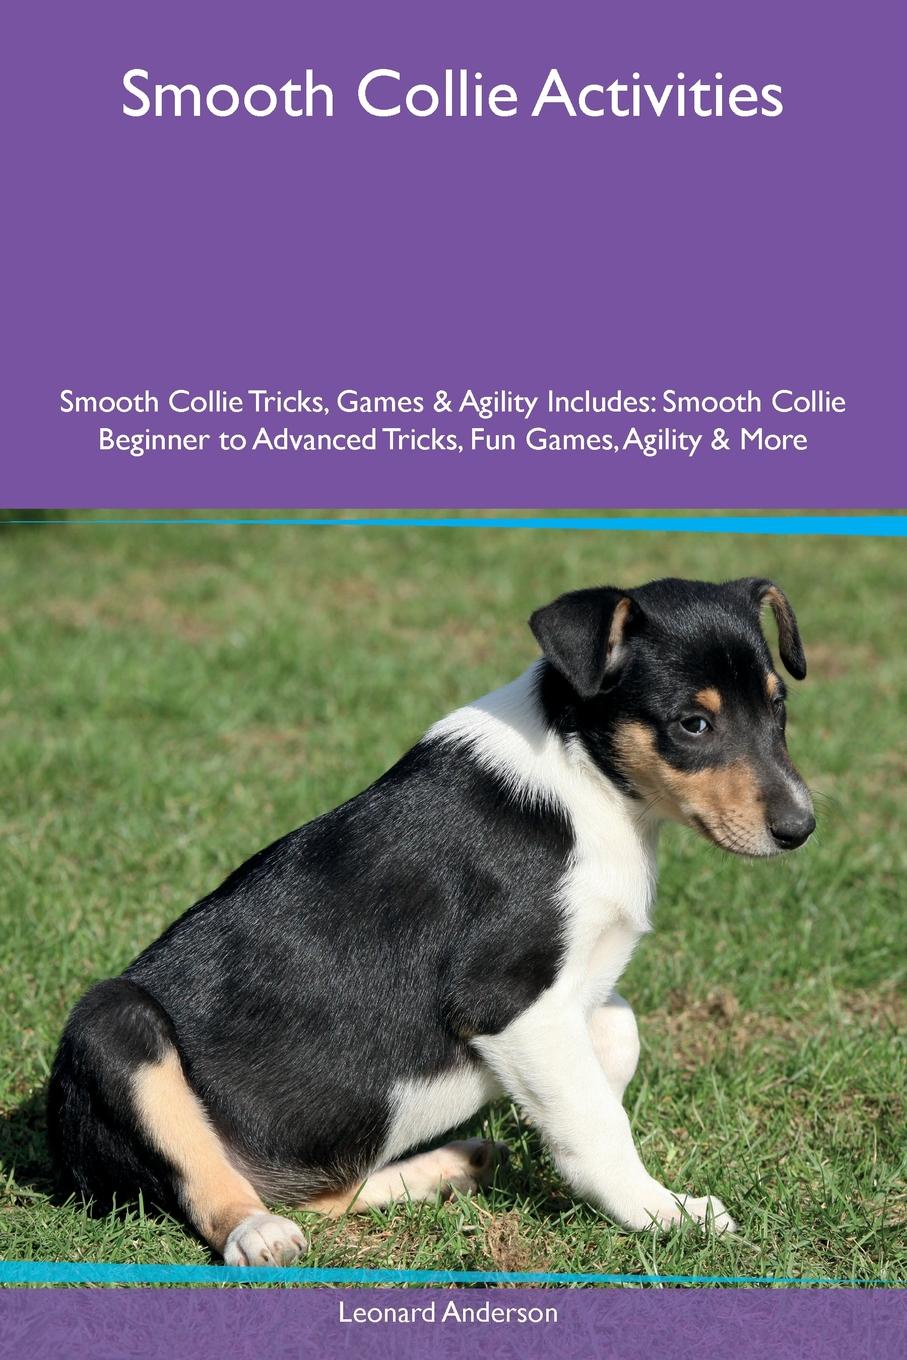 Smooth Collie Activities Smooth Collie Tricks, Games & Agility Includes. Smooth Collie Beginner to Advanced Tricks, Fun Games, Agility & More